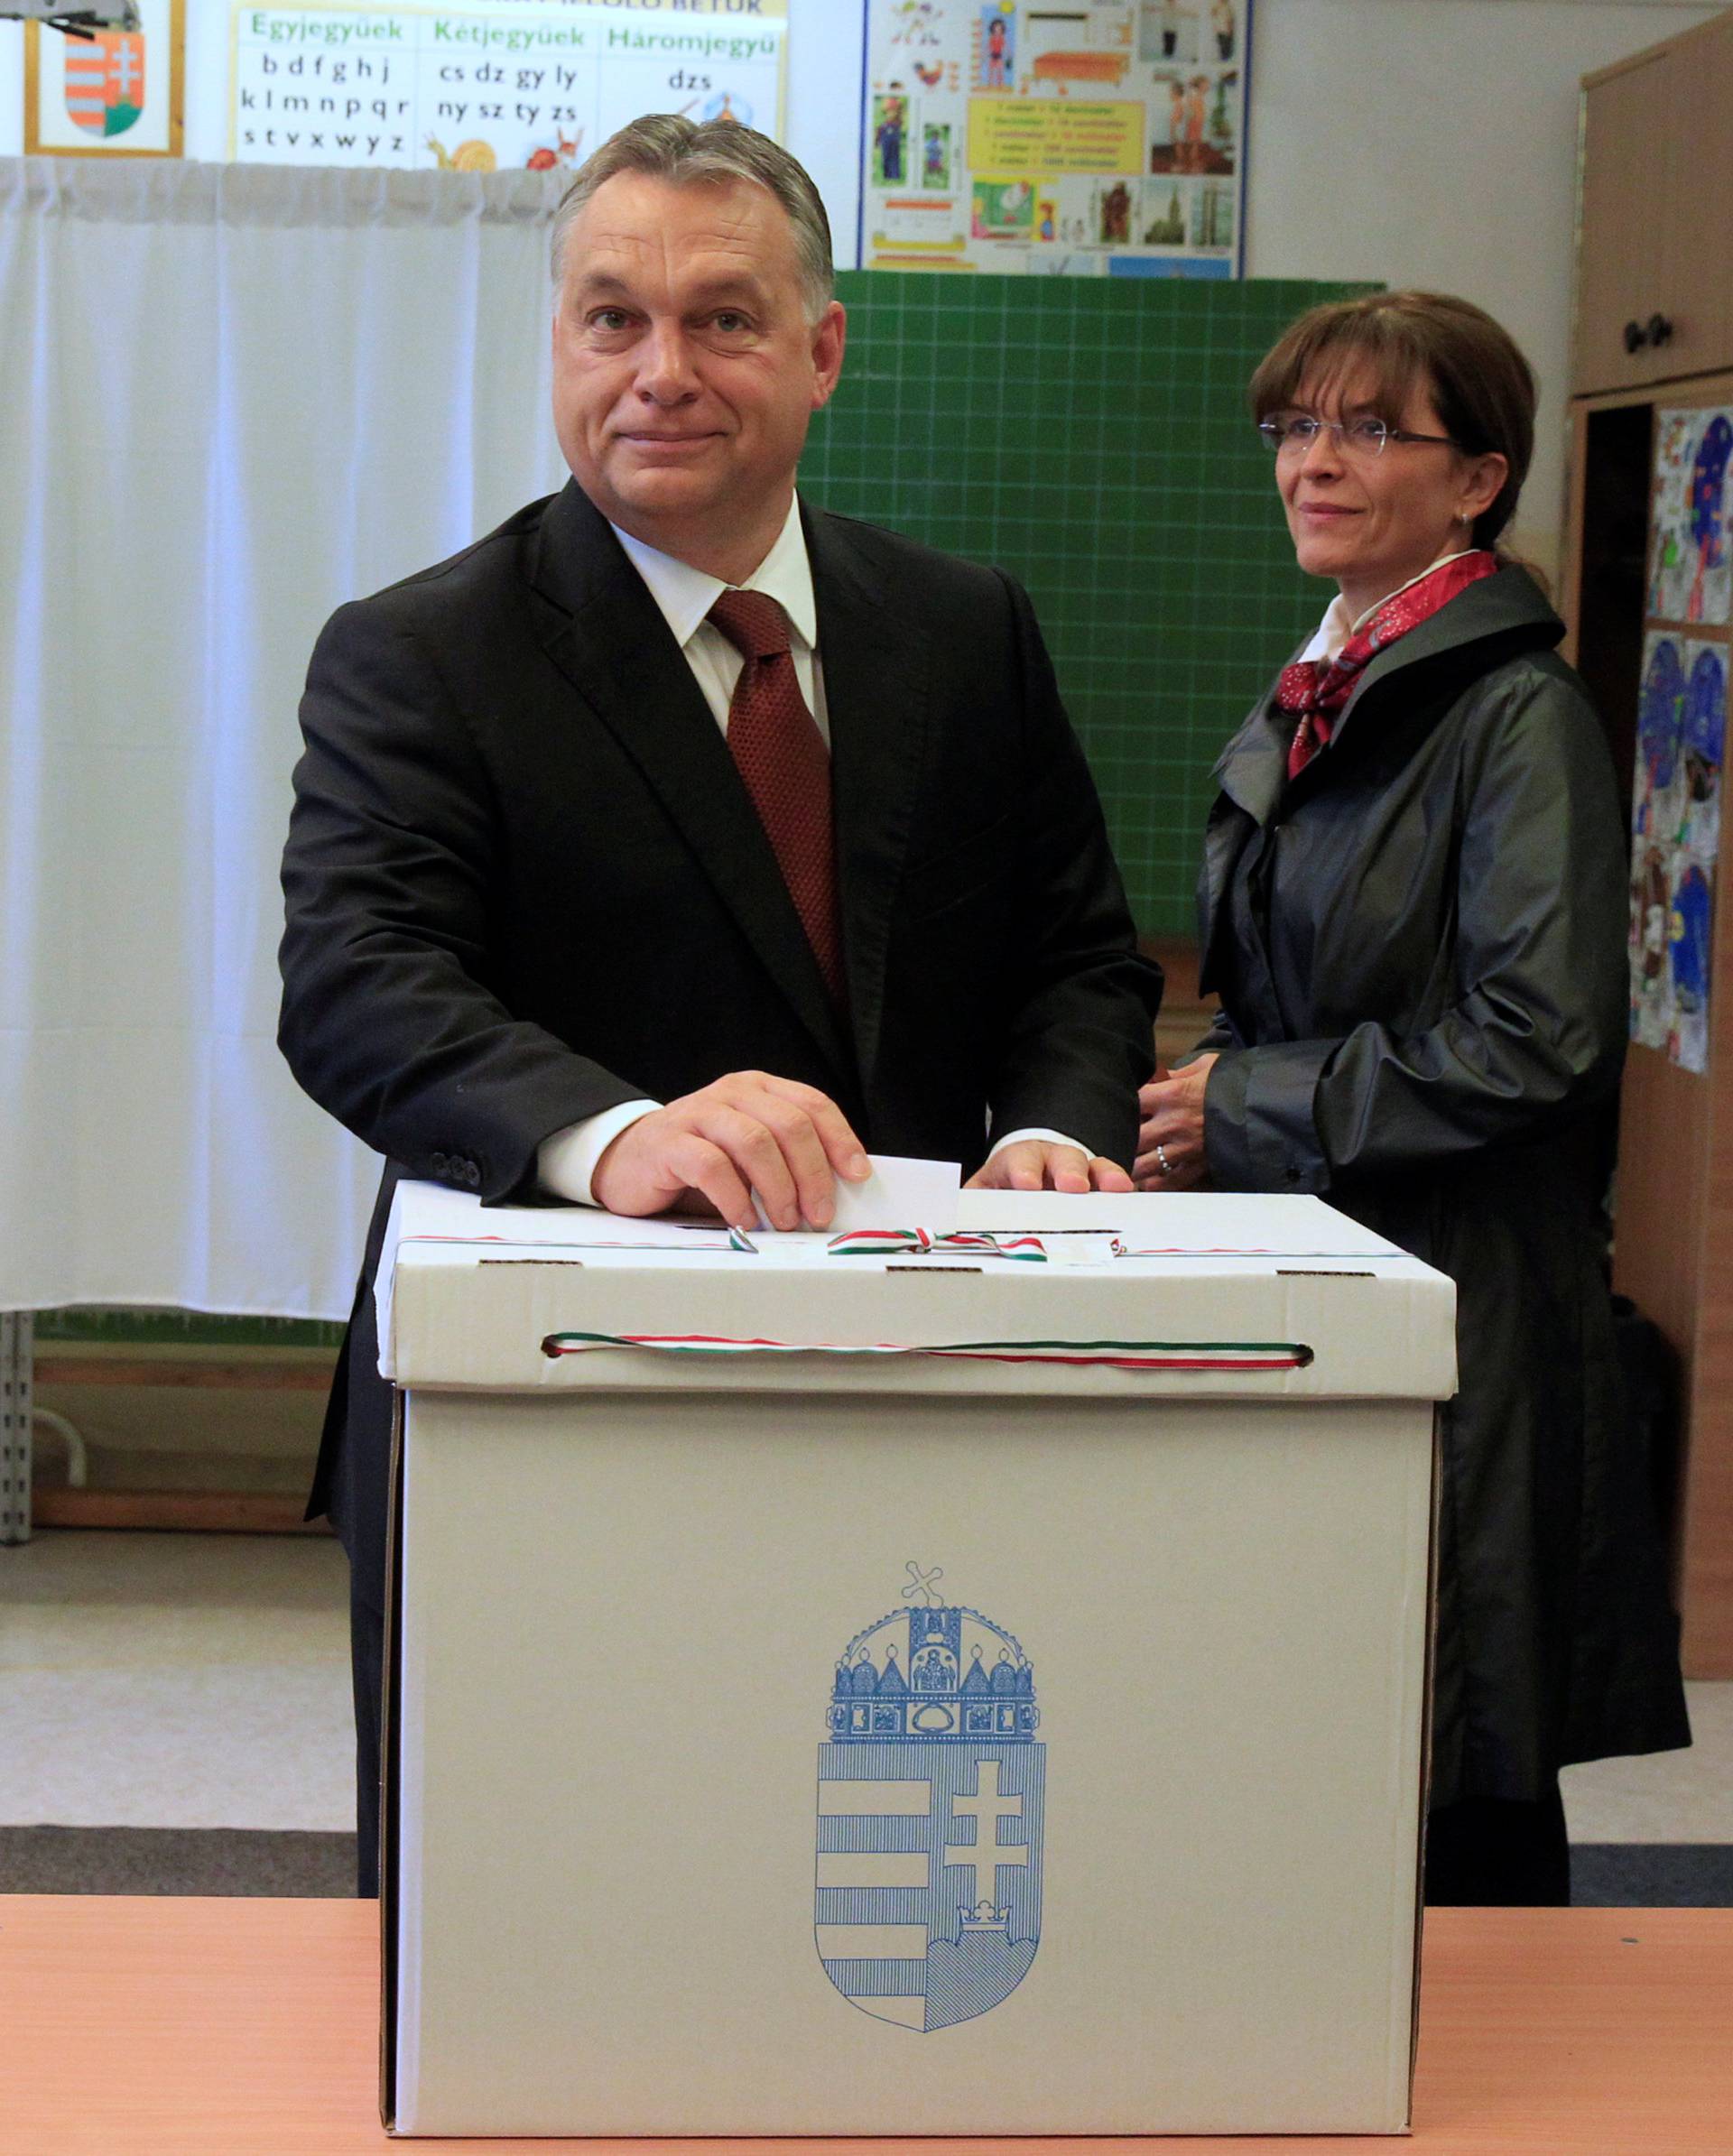 Hungary's Prime Minister Orban casts his ballot next to his wife Levai inside a polling station during a referendum on EU migrant quotas in Budapest